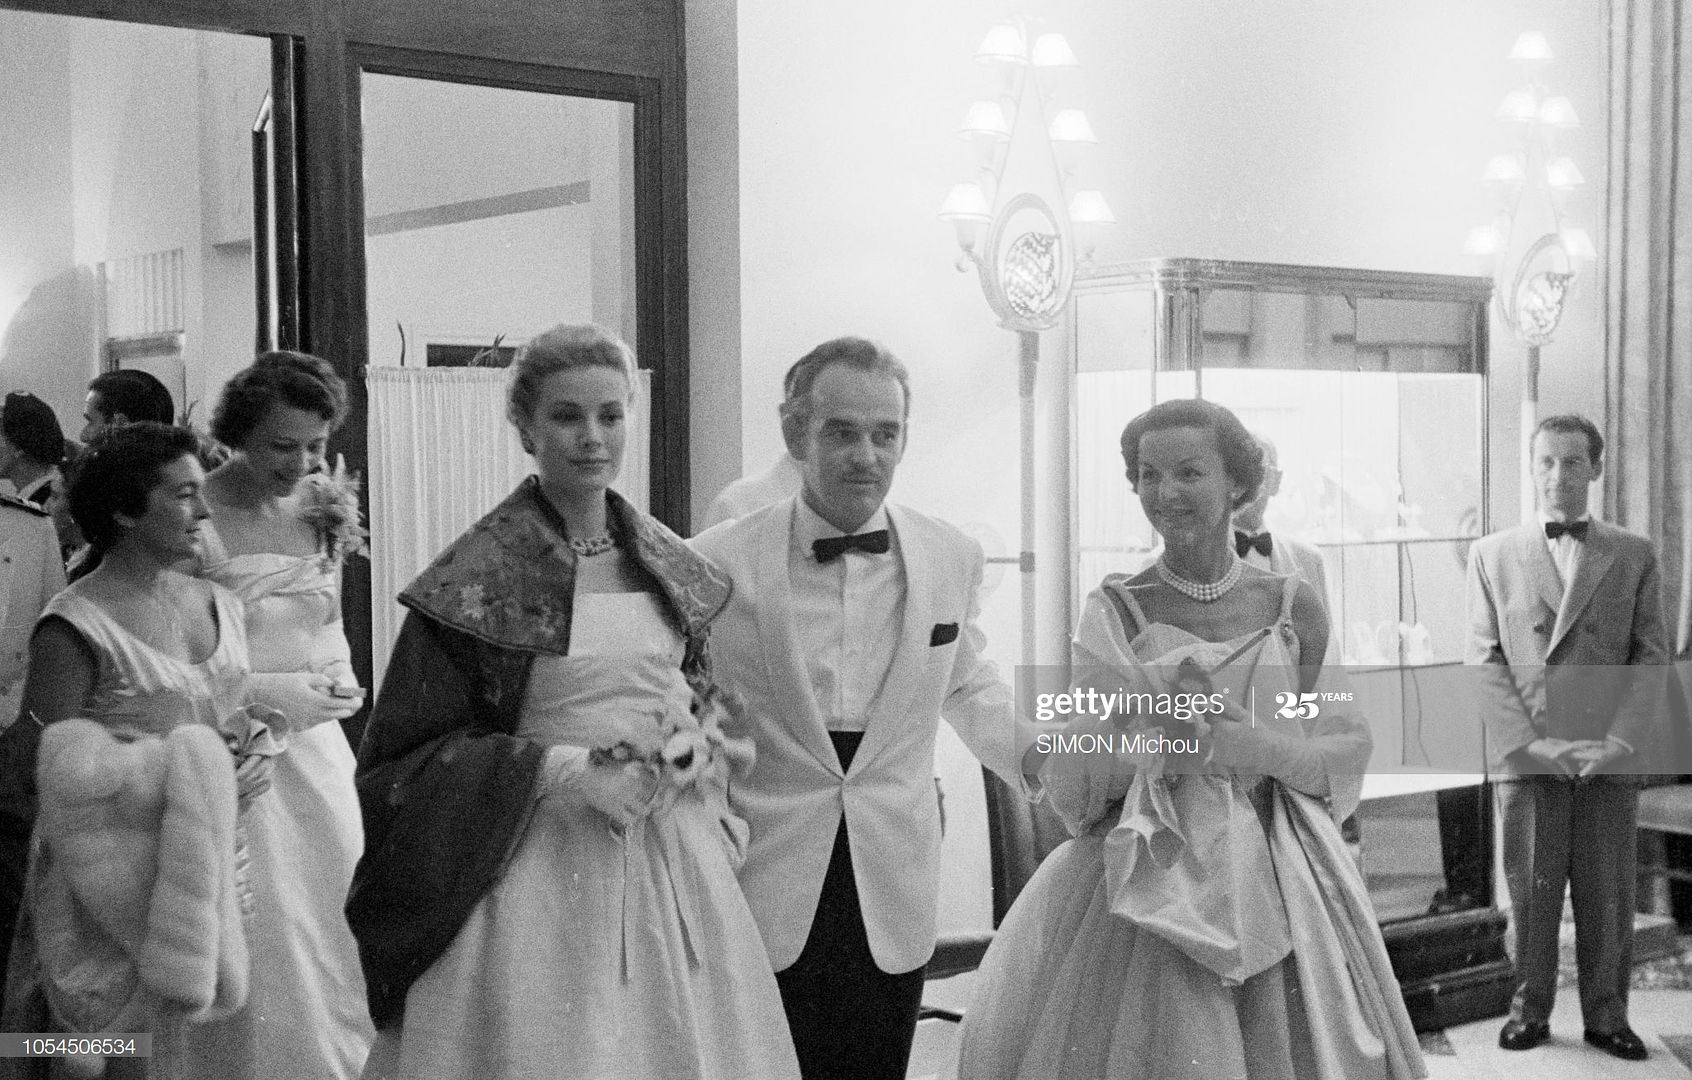 Red Cross ball 1 Aug 1956 said to be diamond and emerald or ruby necklace gettyimages-1054506534-2048x2048